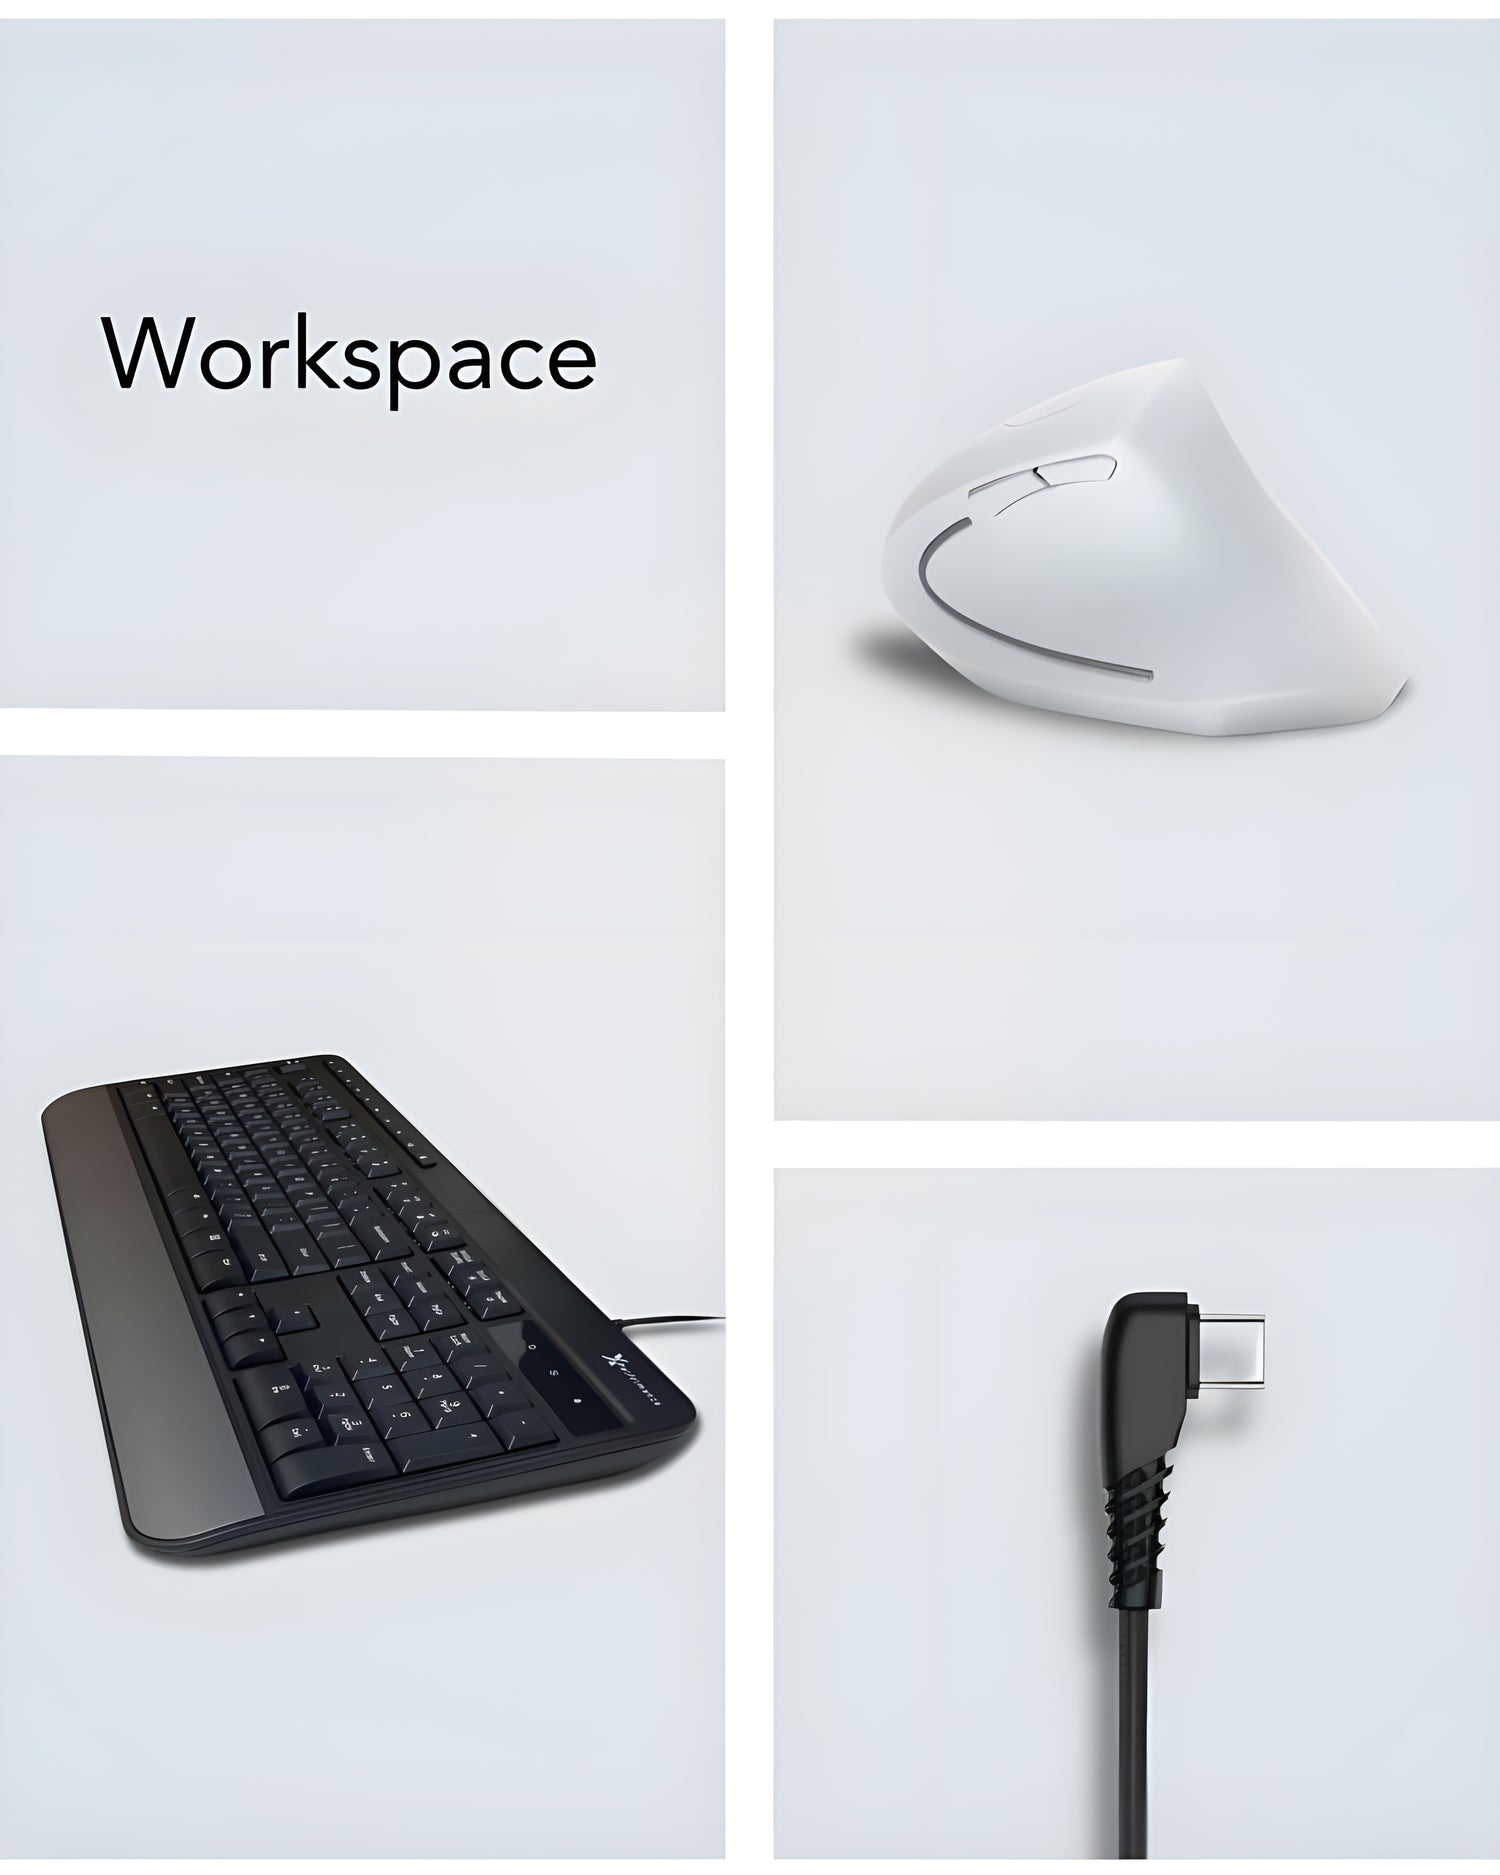 An advertising collage for Clevisco workspace, showcasing ergonomic accessories including a white ergonomic mouse, a sleek black keyboard, and a close-up of a durable USB cable connector, all designed to optimize workspace functionality and comfort.